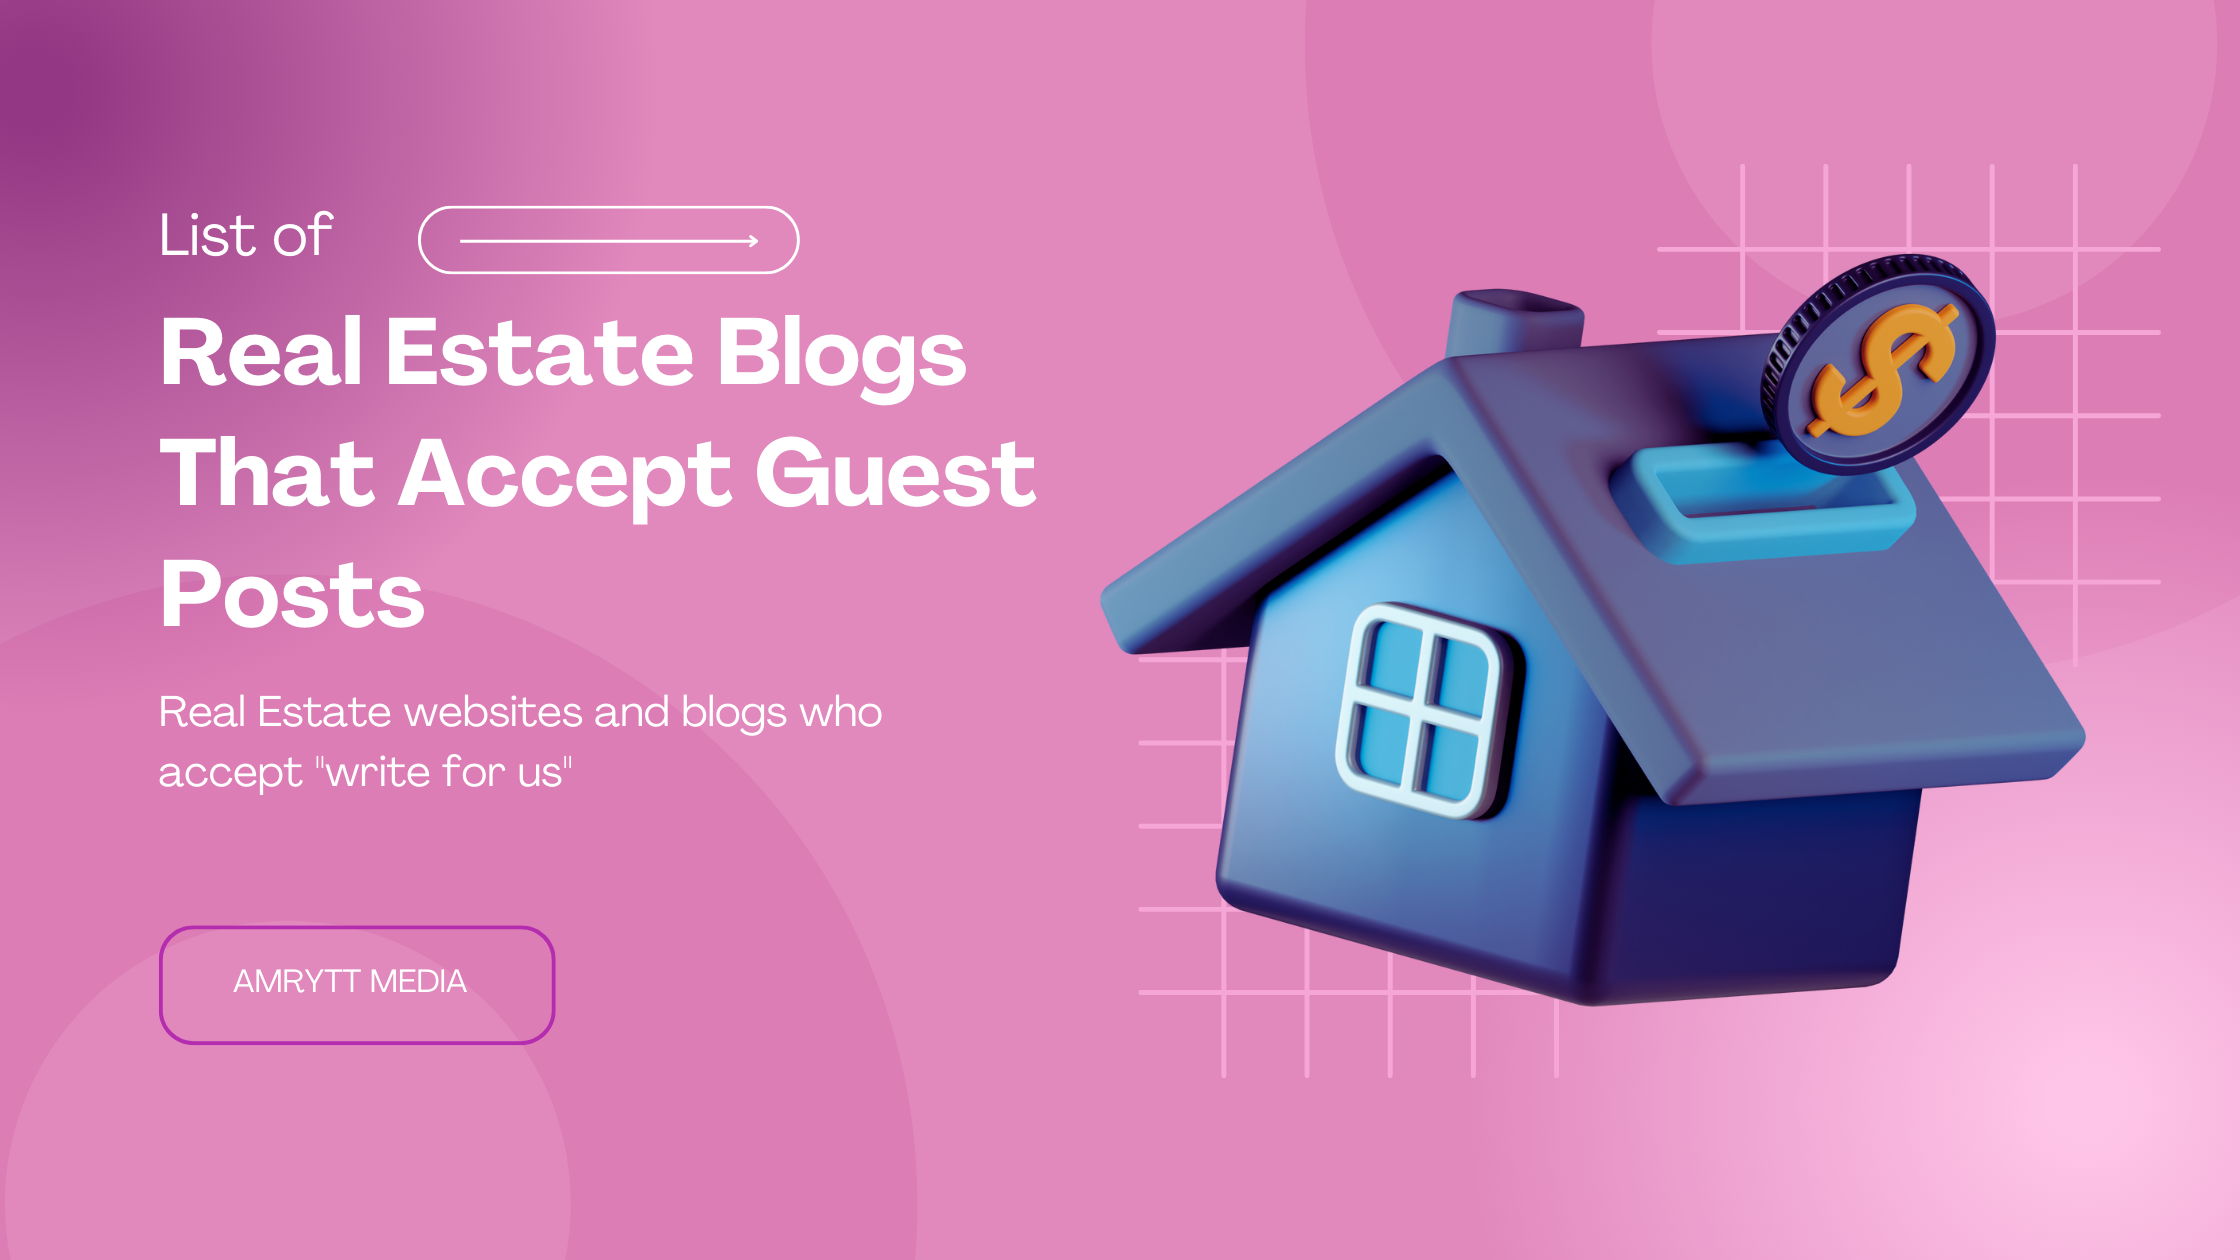 Real Estate Blogs That Accept Guest Posts